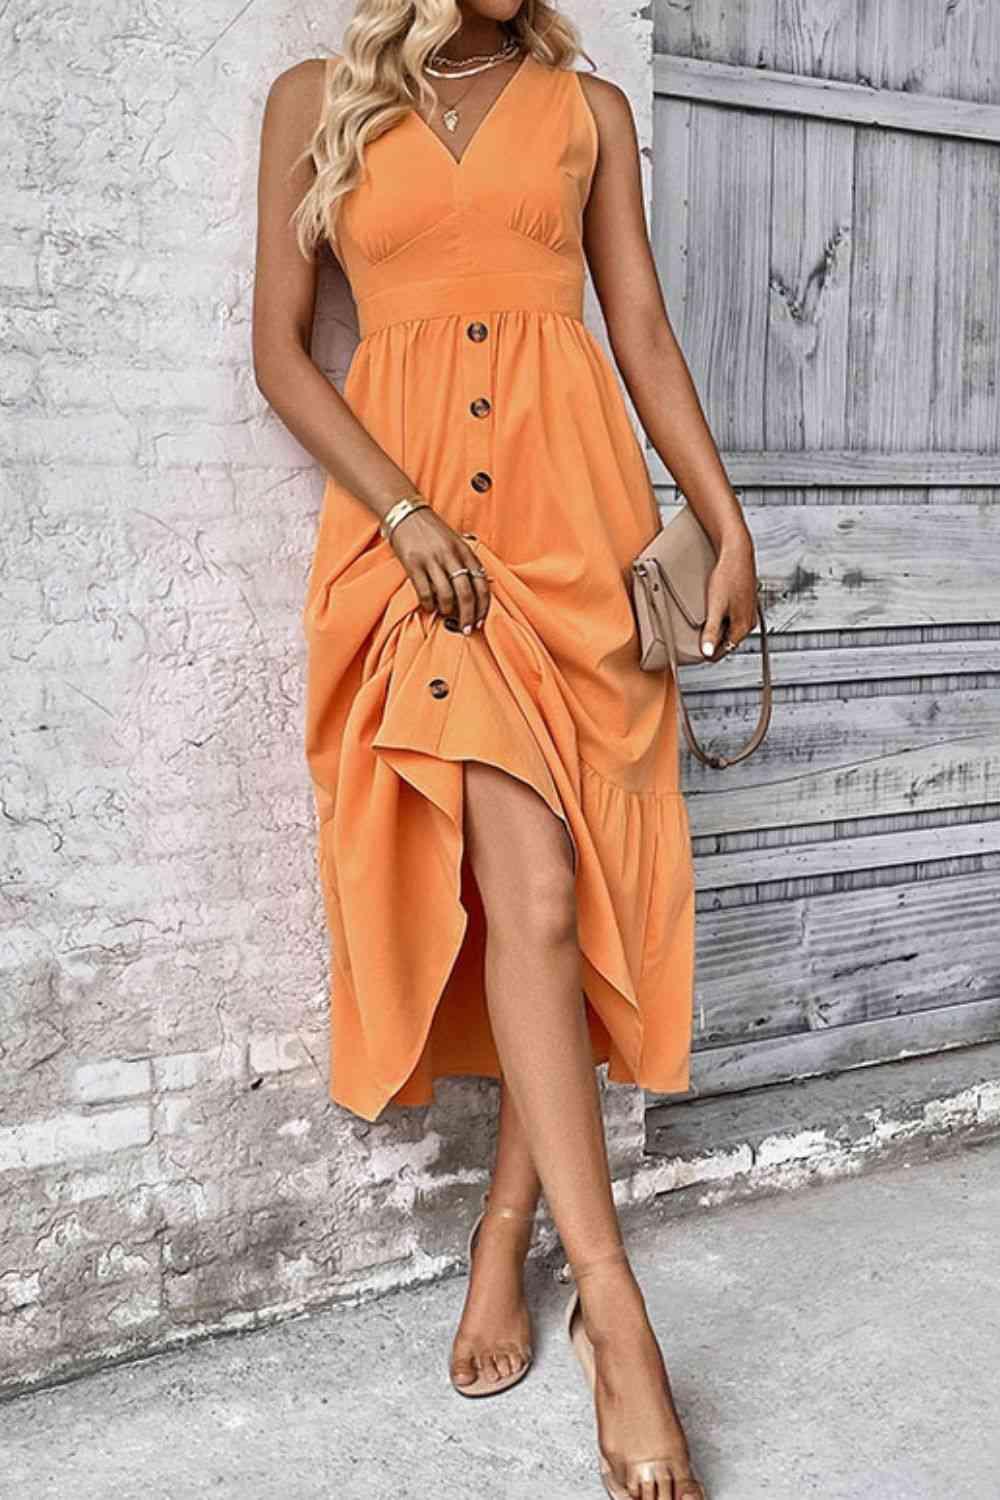 a woman in an orange dress leaning against a wall